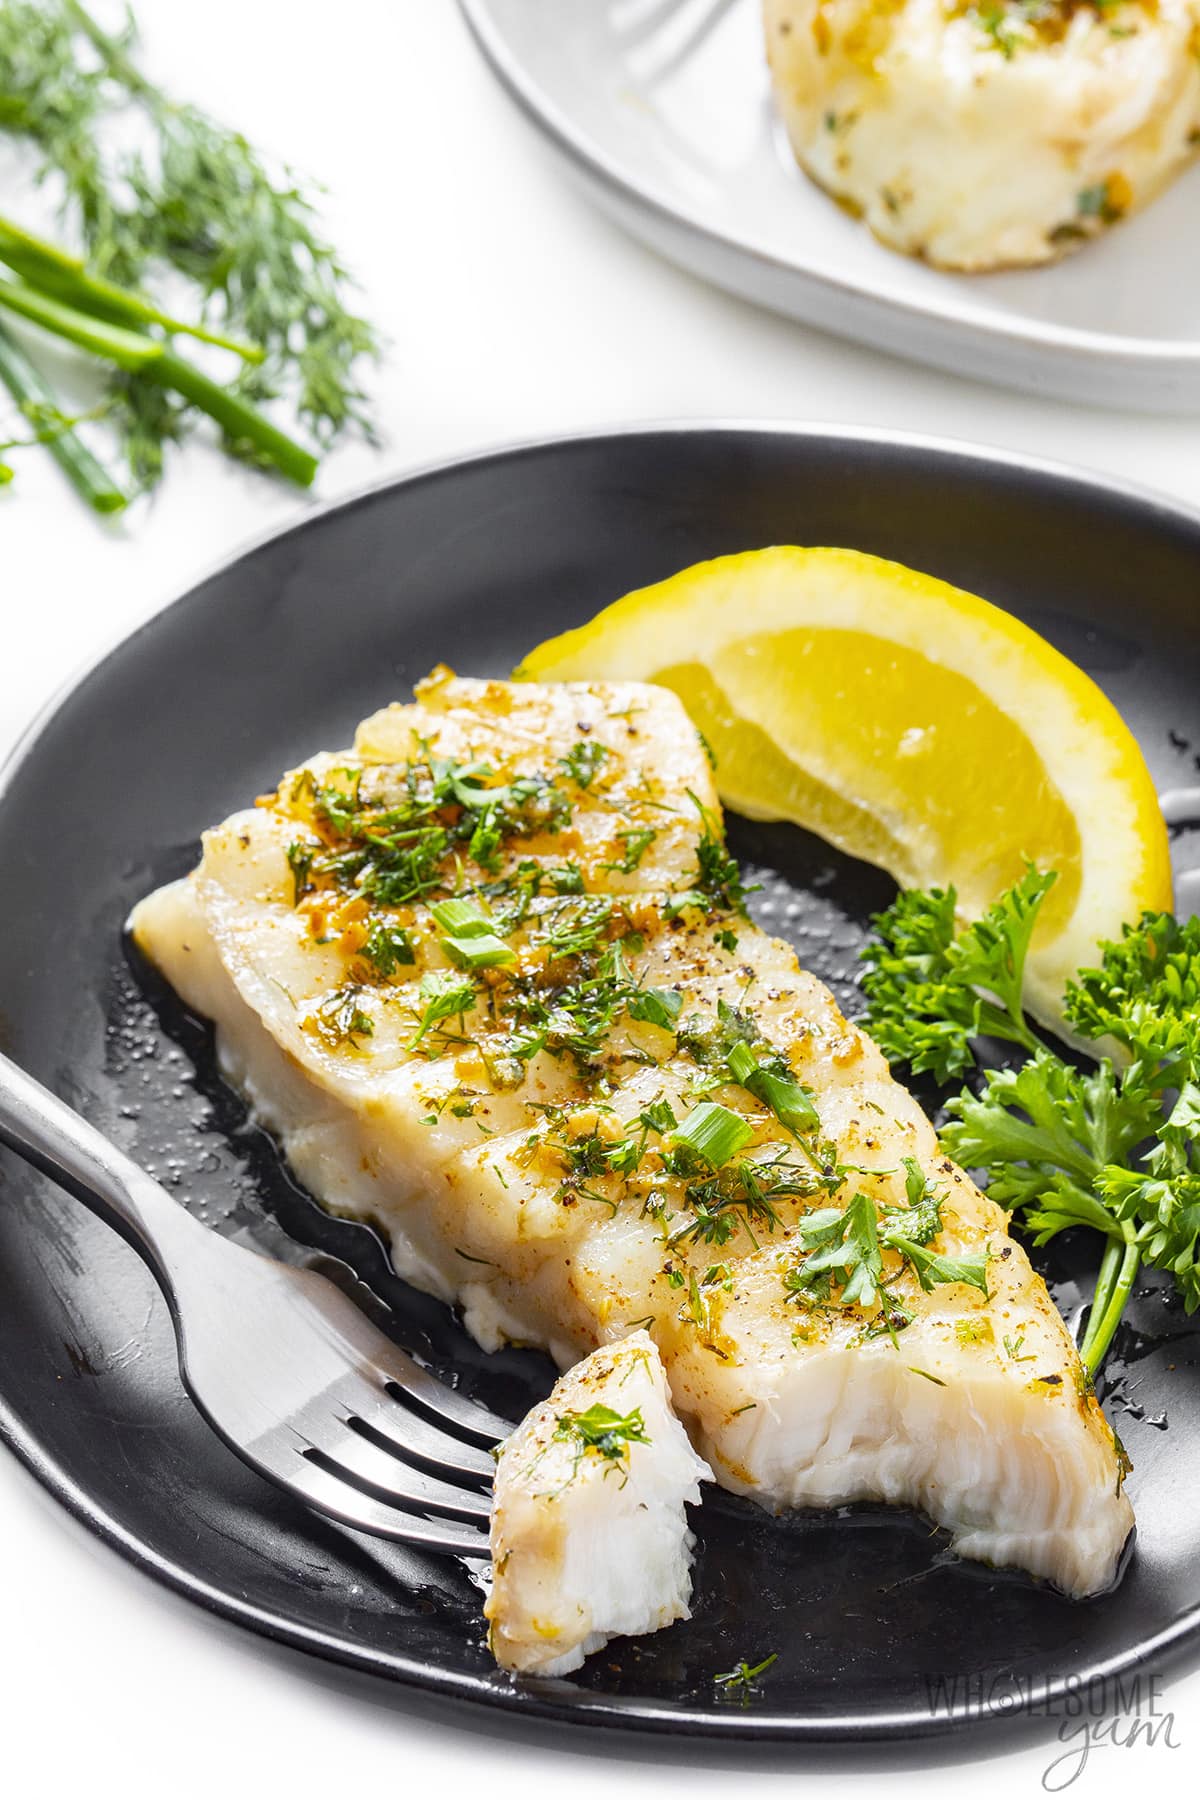 Baked halibut on a plate with a piece flaked using a fork.